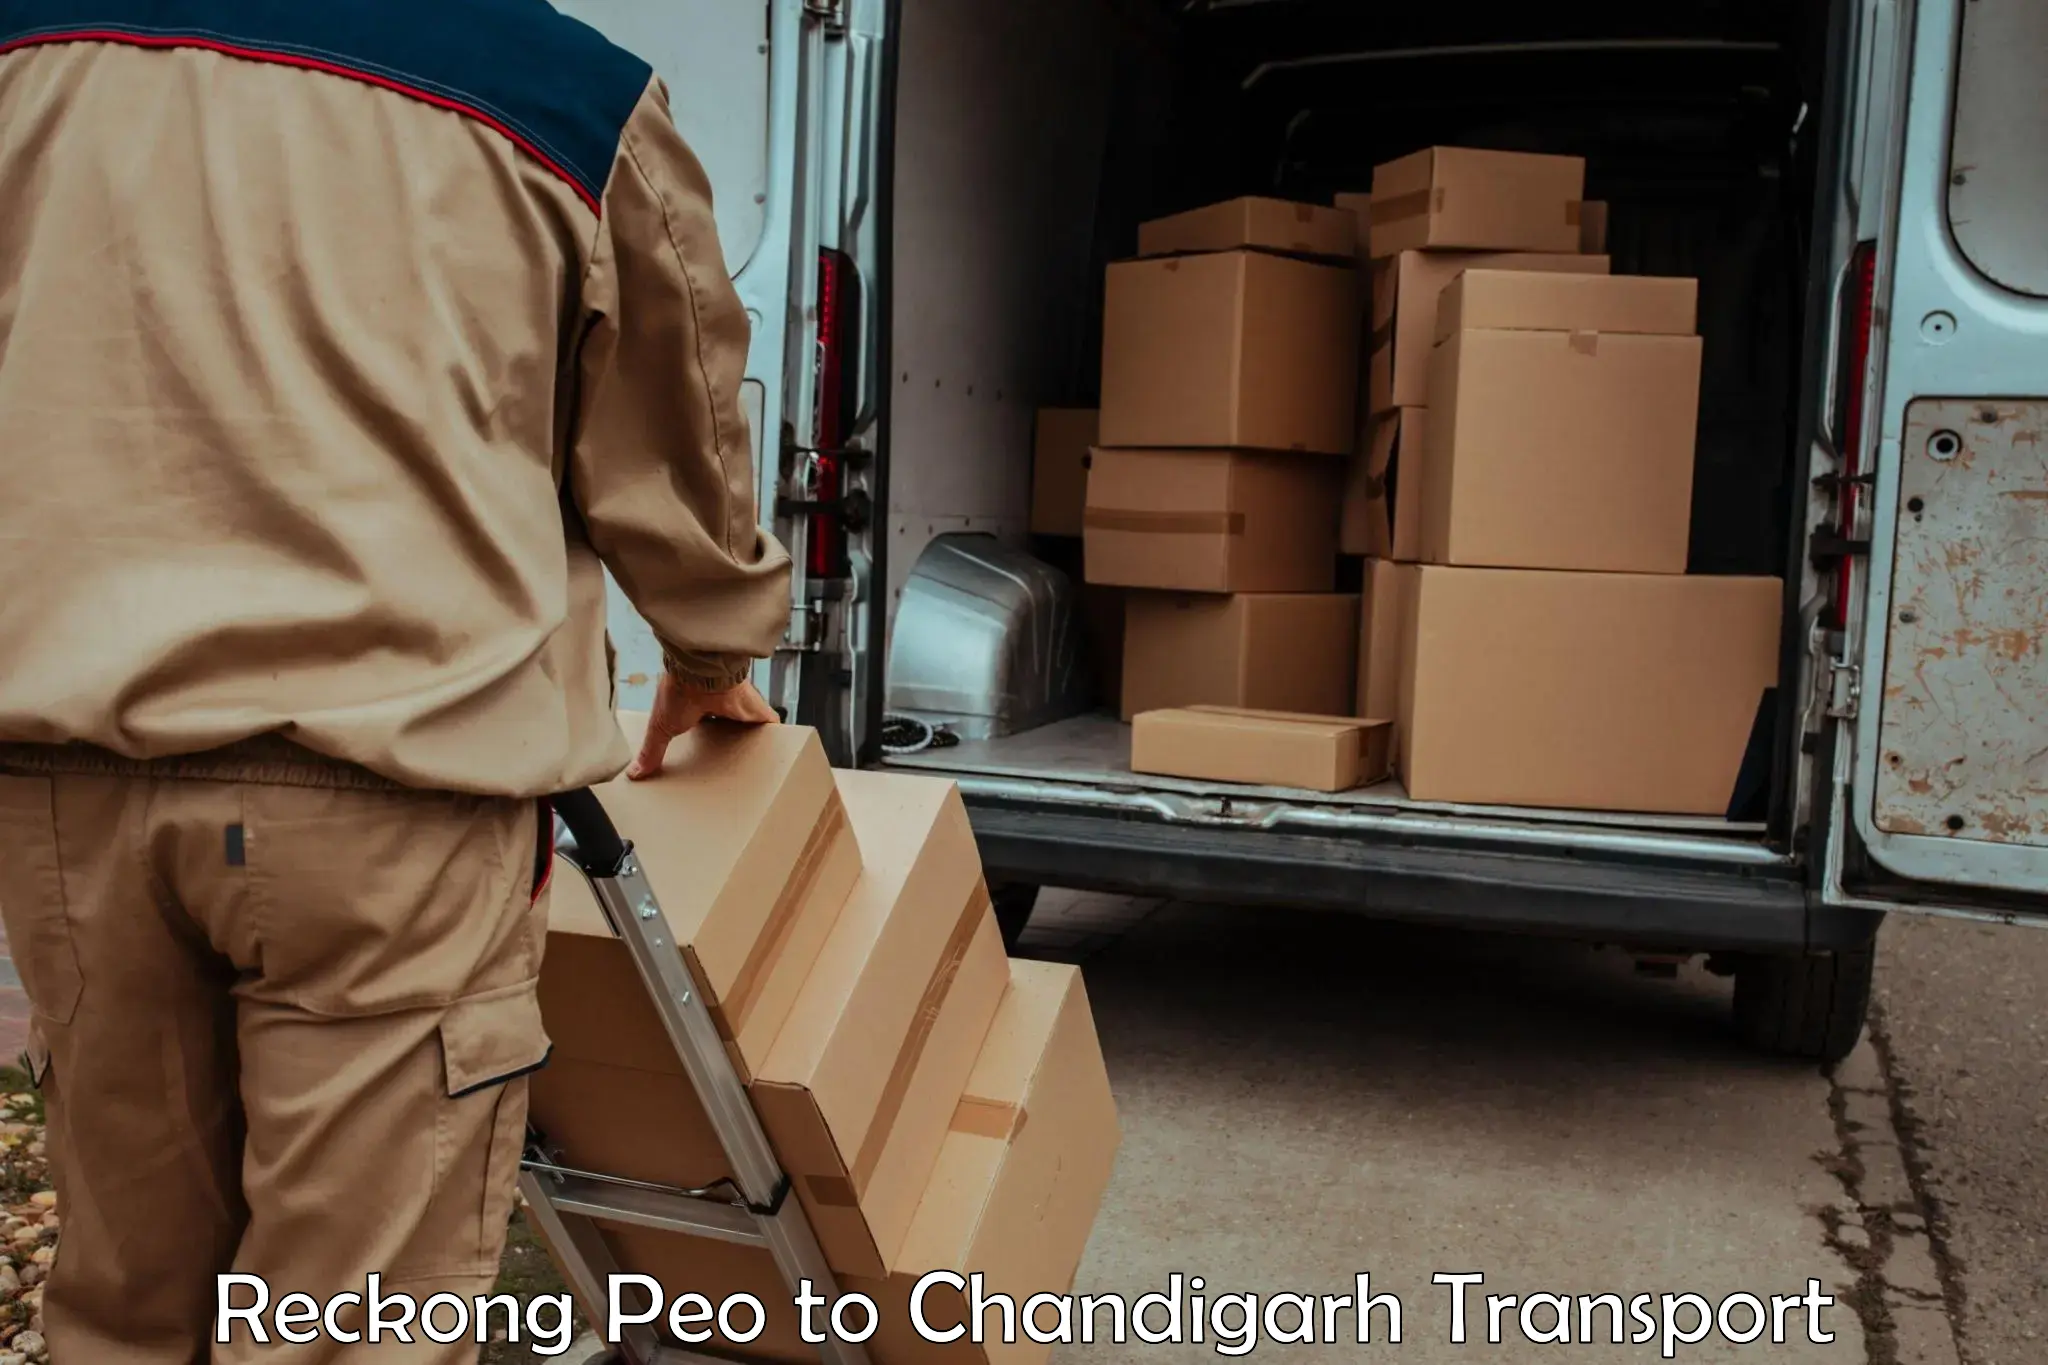 Land transport services Reckong Peo to Chandigarh